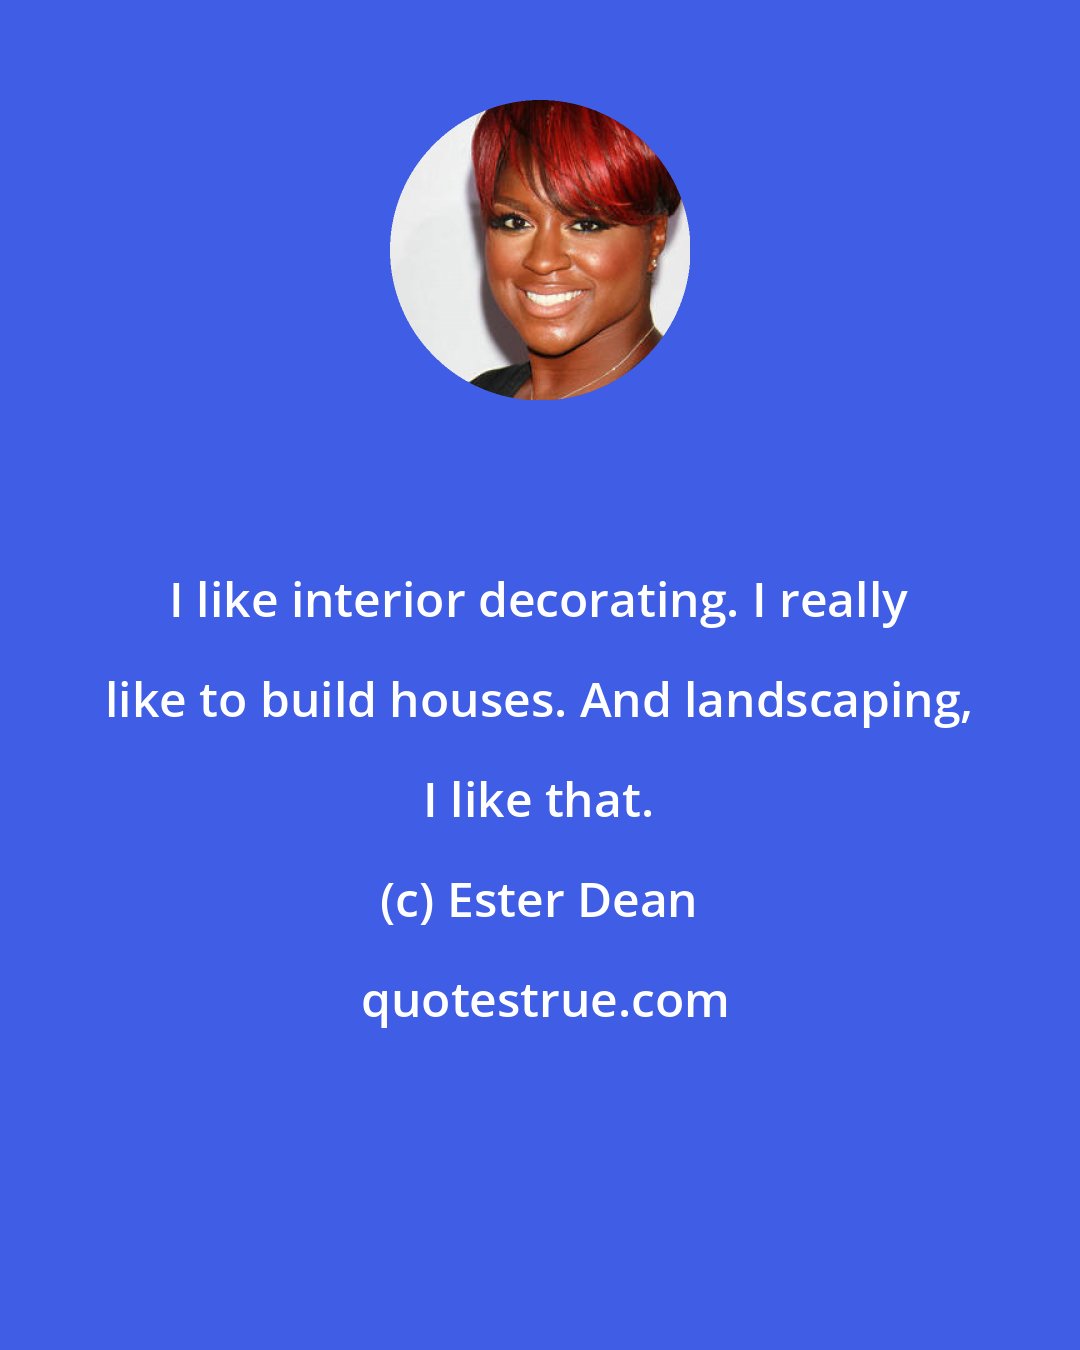 Ester Dean: I like interior decorating. I really like to build houses. And landscaping, I like that.